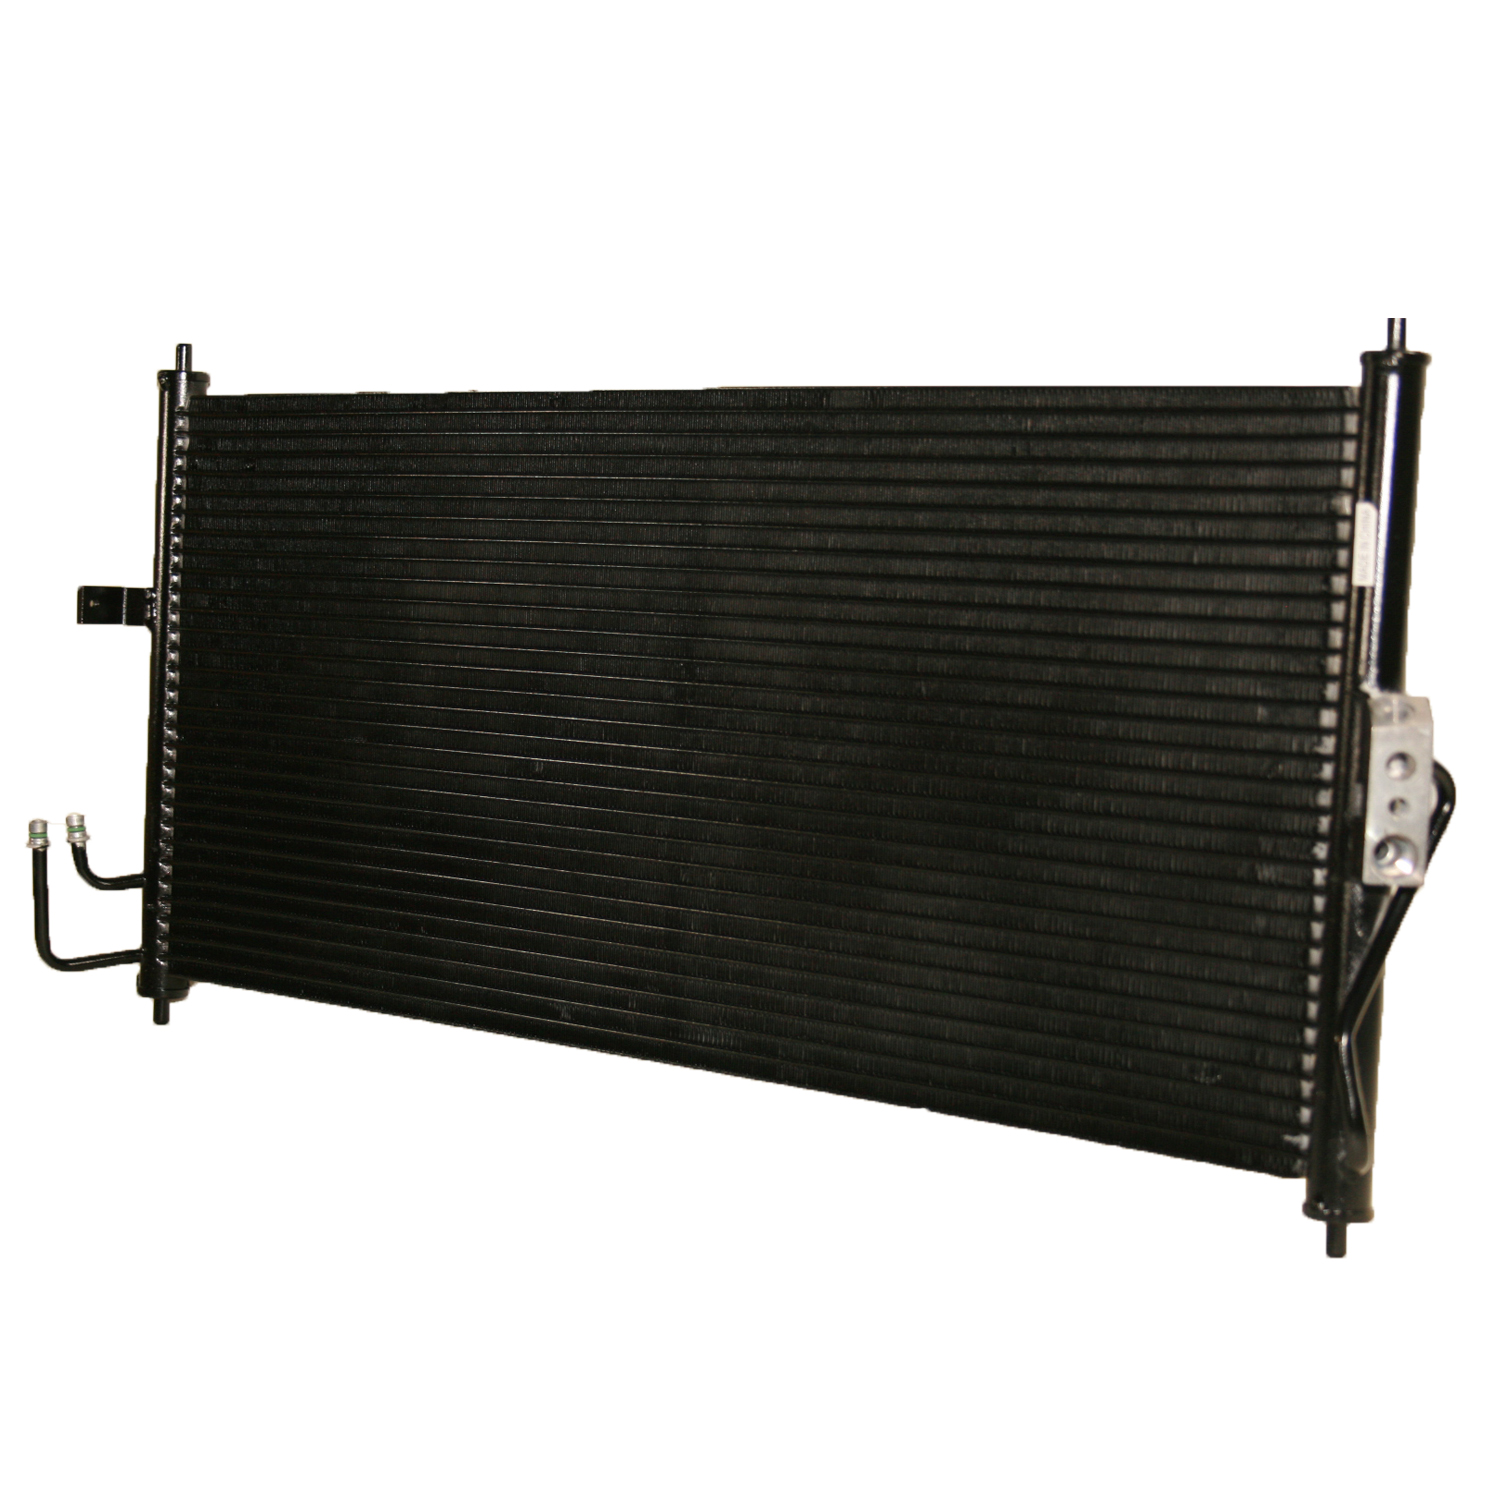 TCW Condenser 44-3099 New Product Image field_60b6a13a6e67c